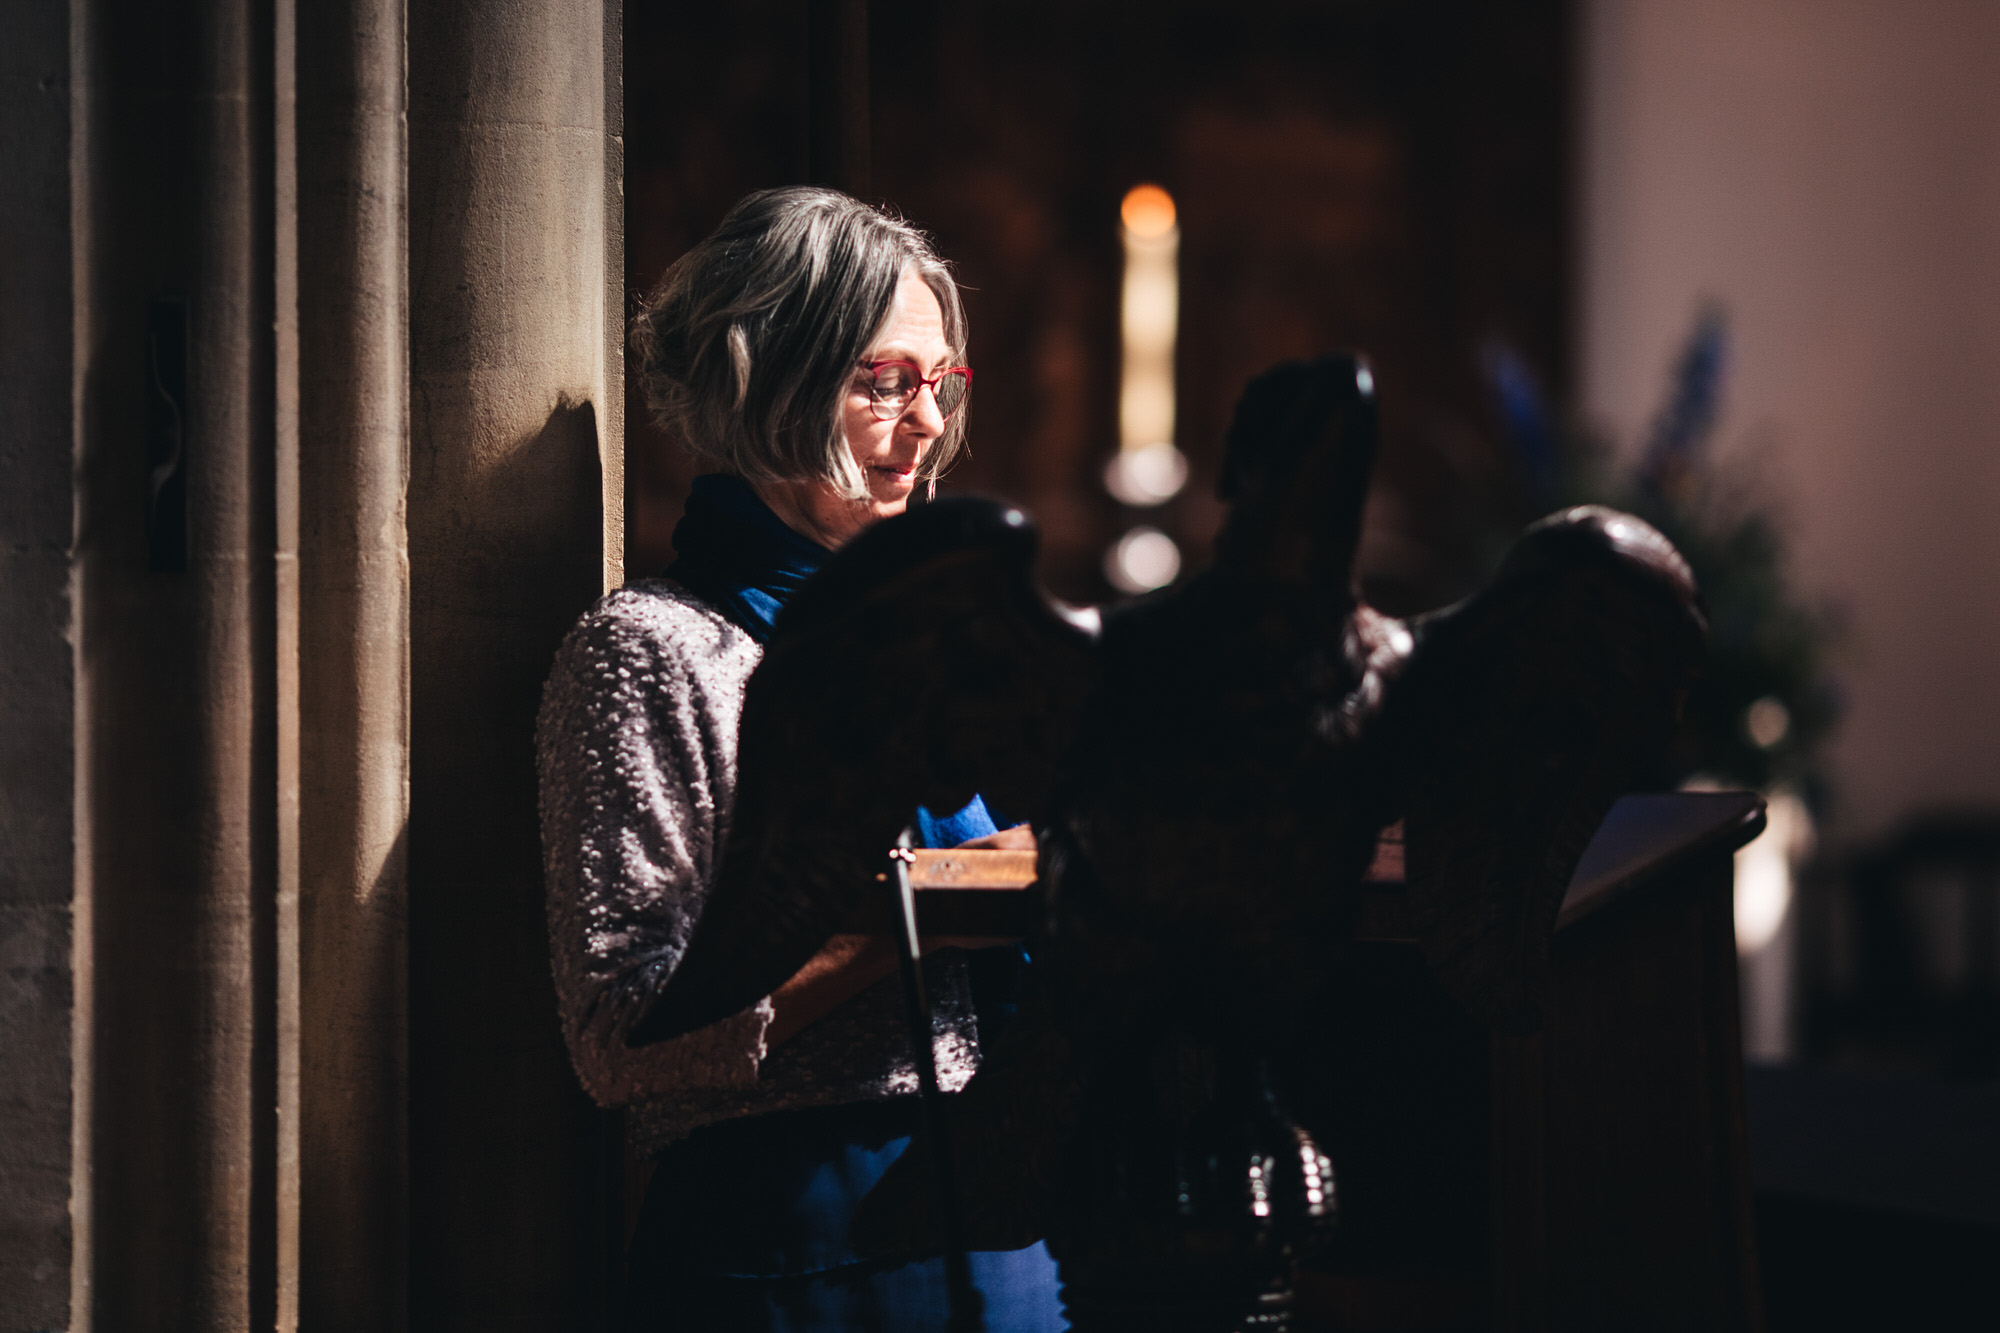 beautiful light streams in to the church on a guest doing a reading